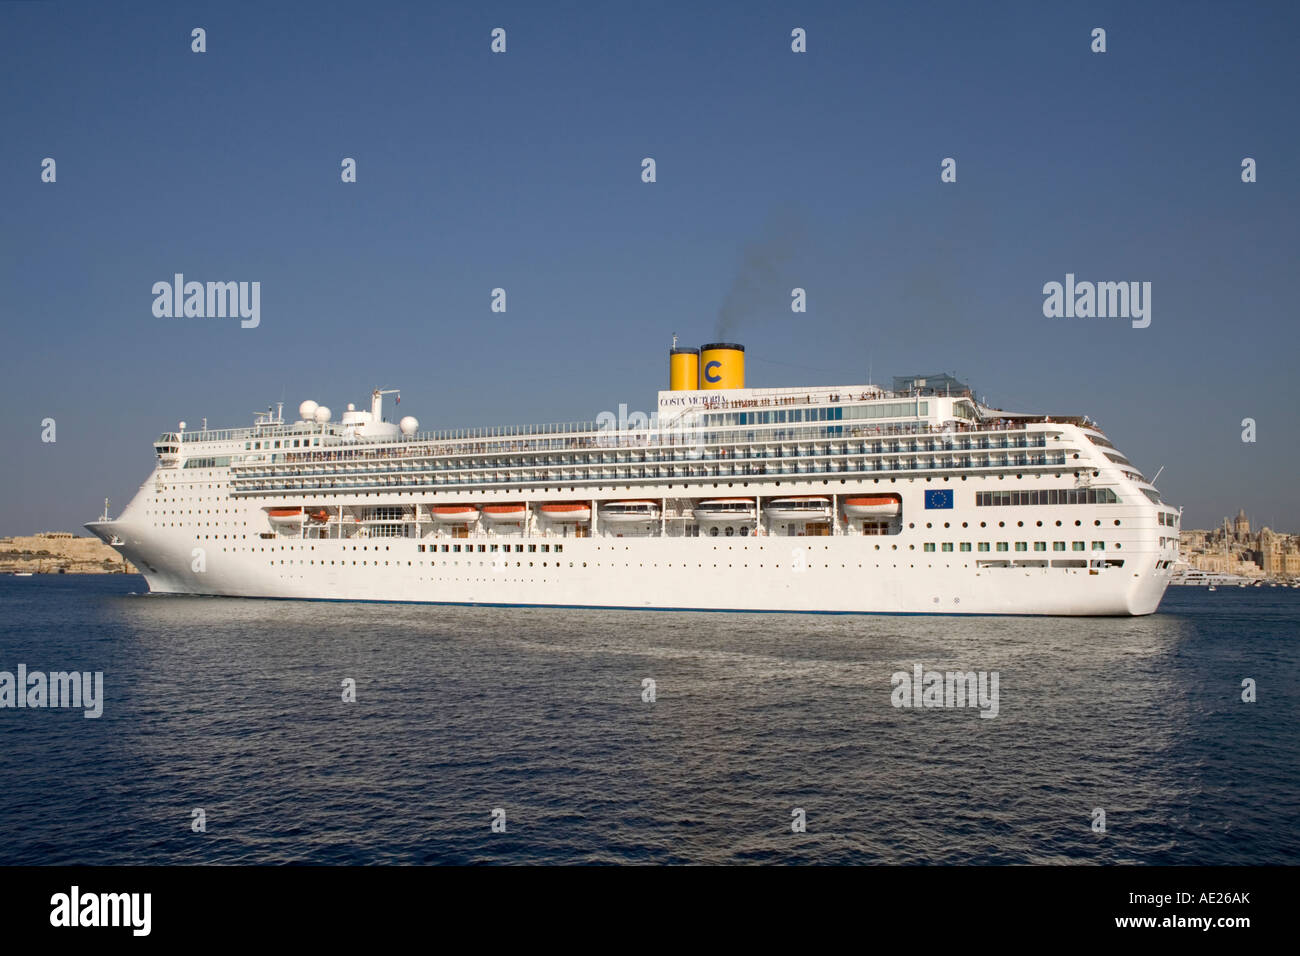 The cruise liner Costa Victoria departing from Malta Stock Photo